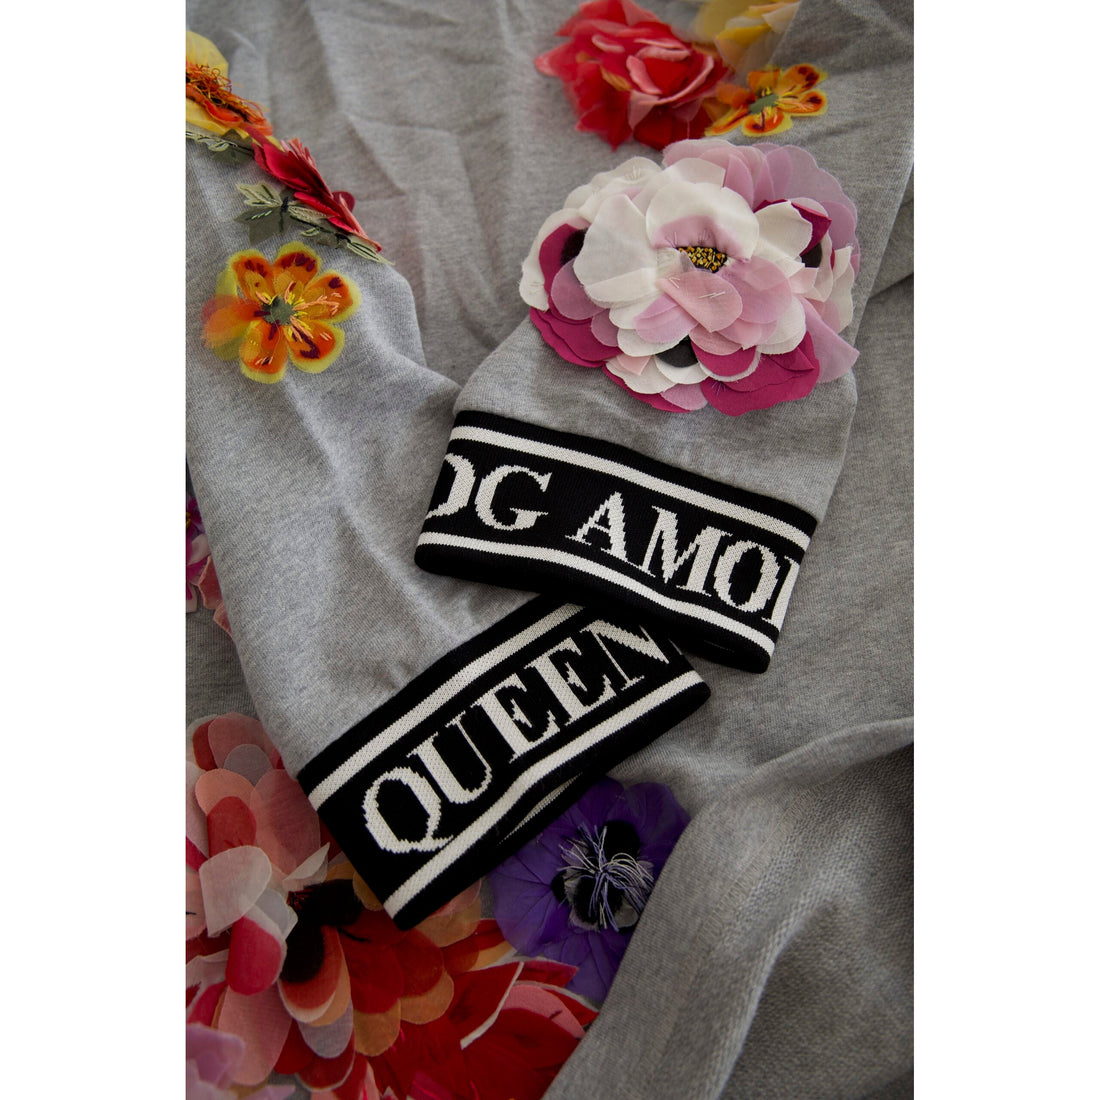 Dolce & Gabbana Gray DG Amore Queen Floral Pullover Sweater